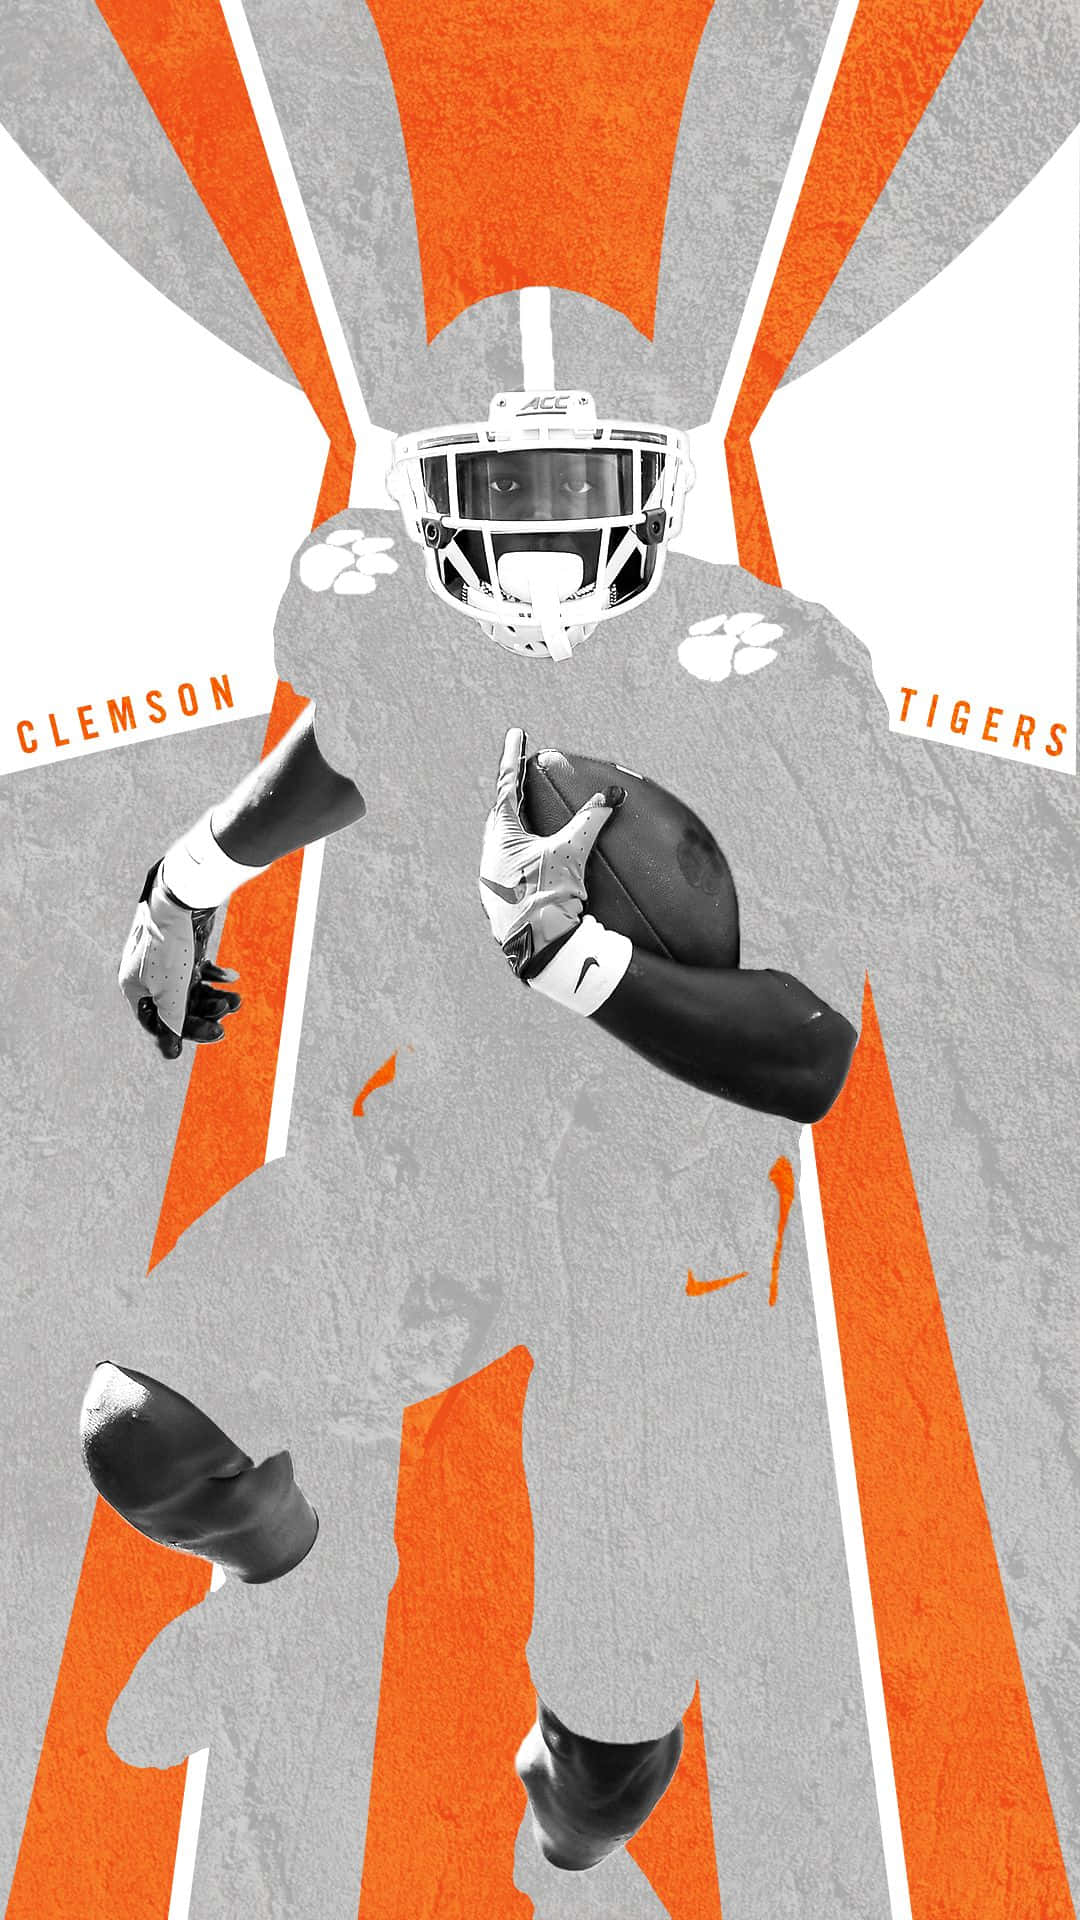 Make Your Style Unique with the Clemson Tiger Iphone Wallpaper